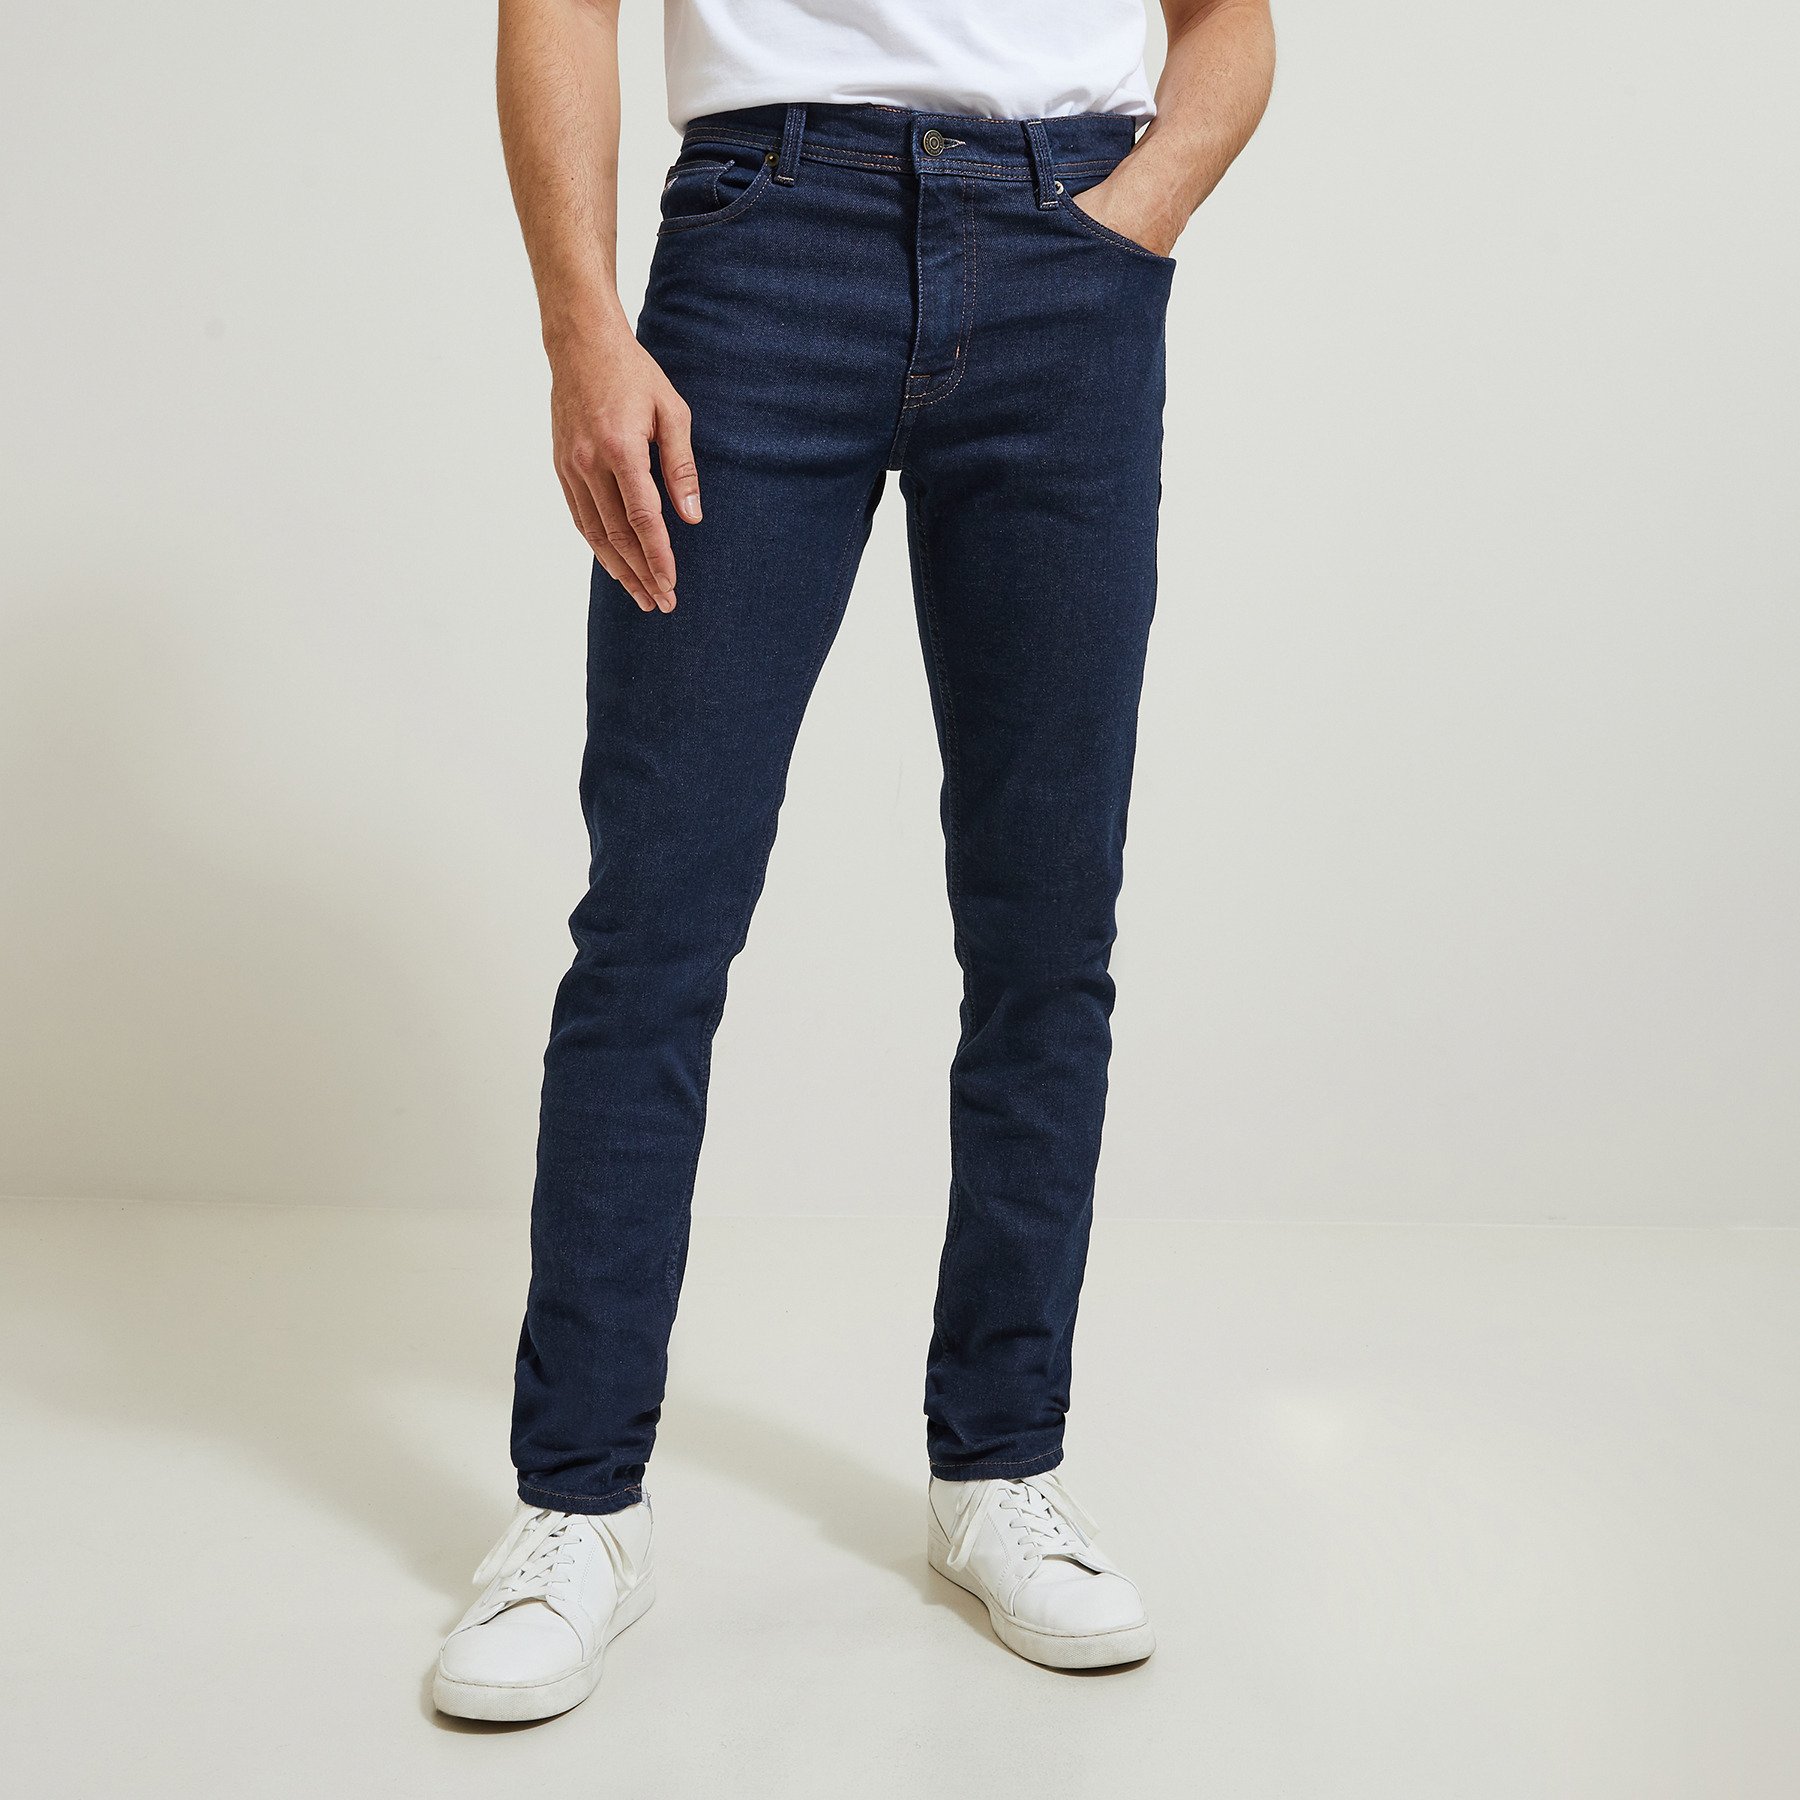 Jean slim cinq neuf édition n°3 Made in France Bleu 36 98% Coton, 2% Elasthanne Homme